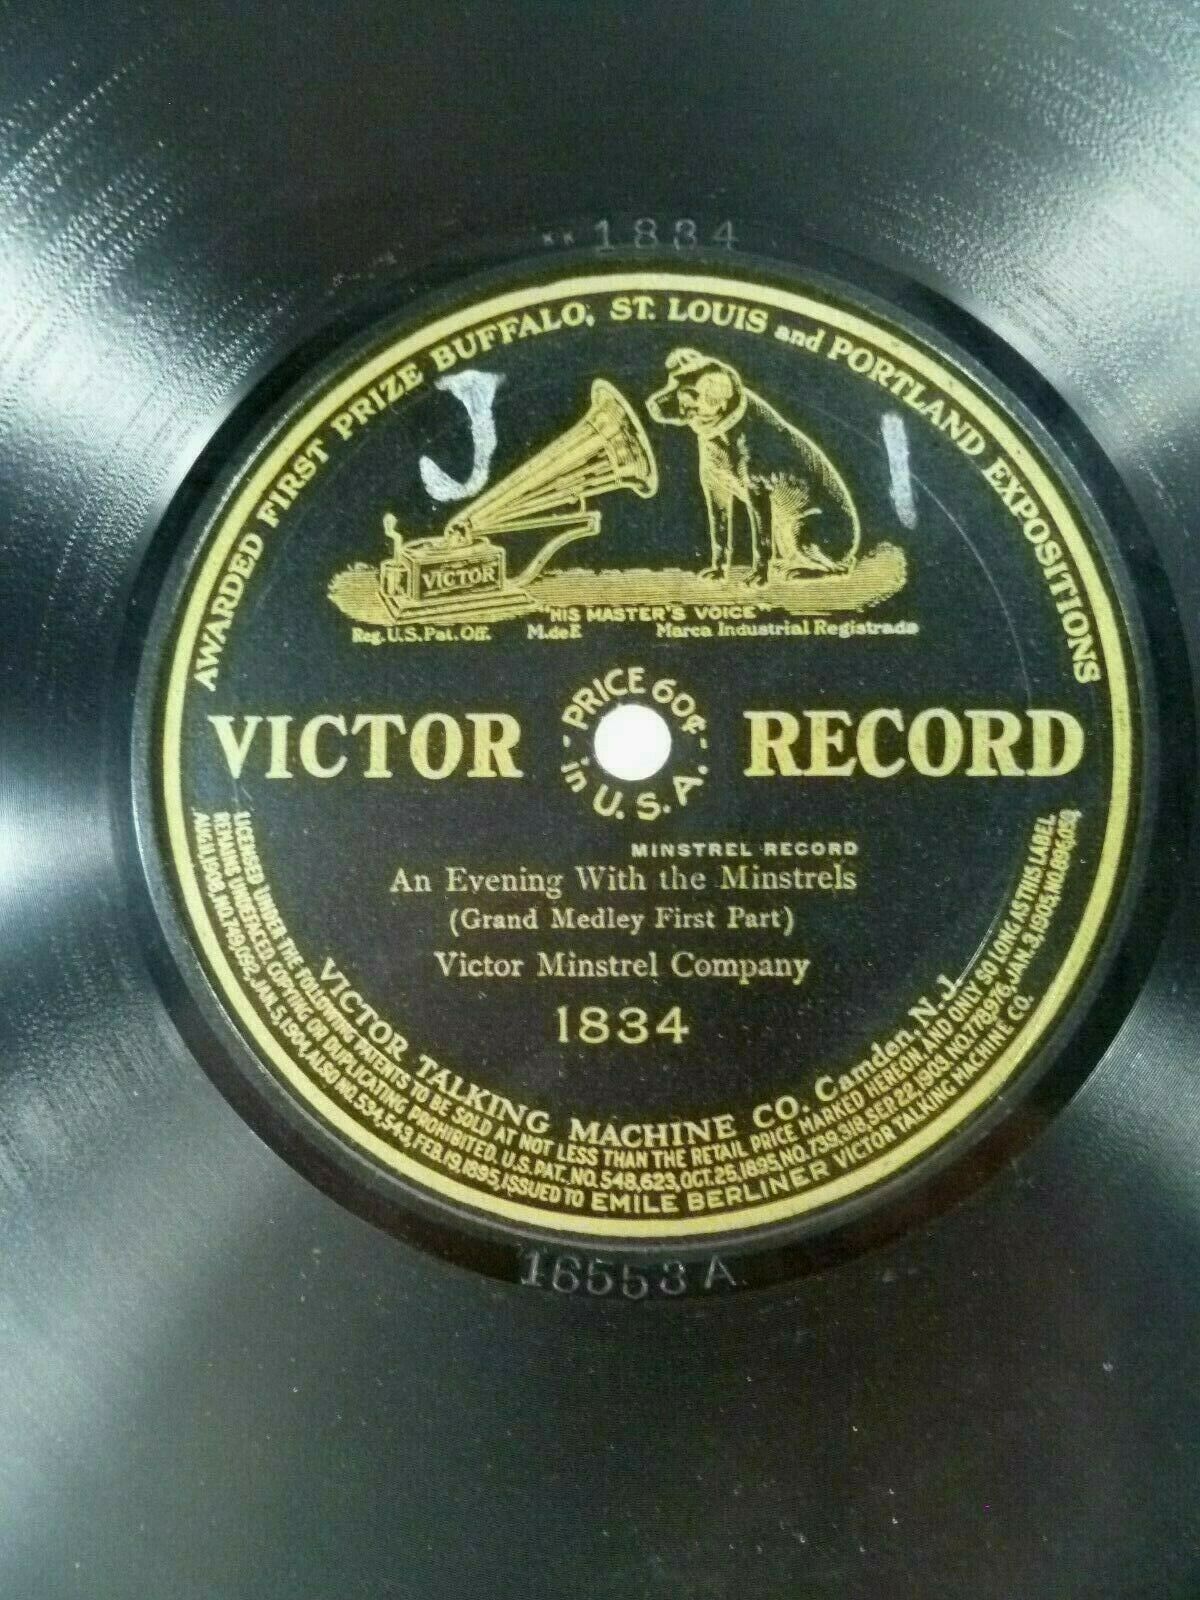 popsike.com - Victor 1834 An Evening With the Minstrels Folk 78 rpm 10 ...